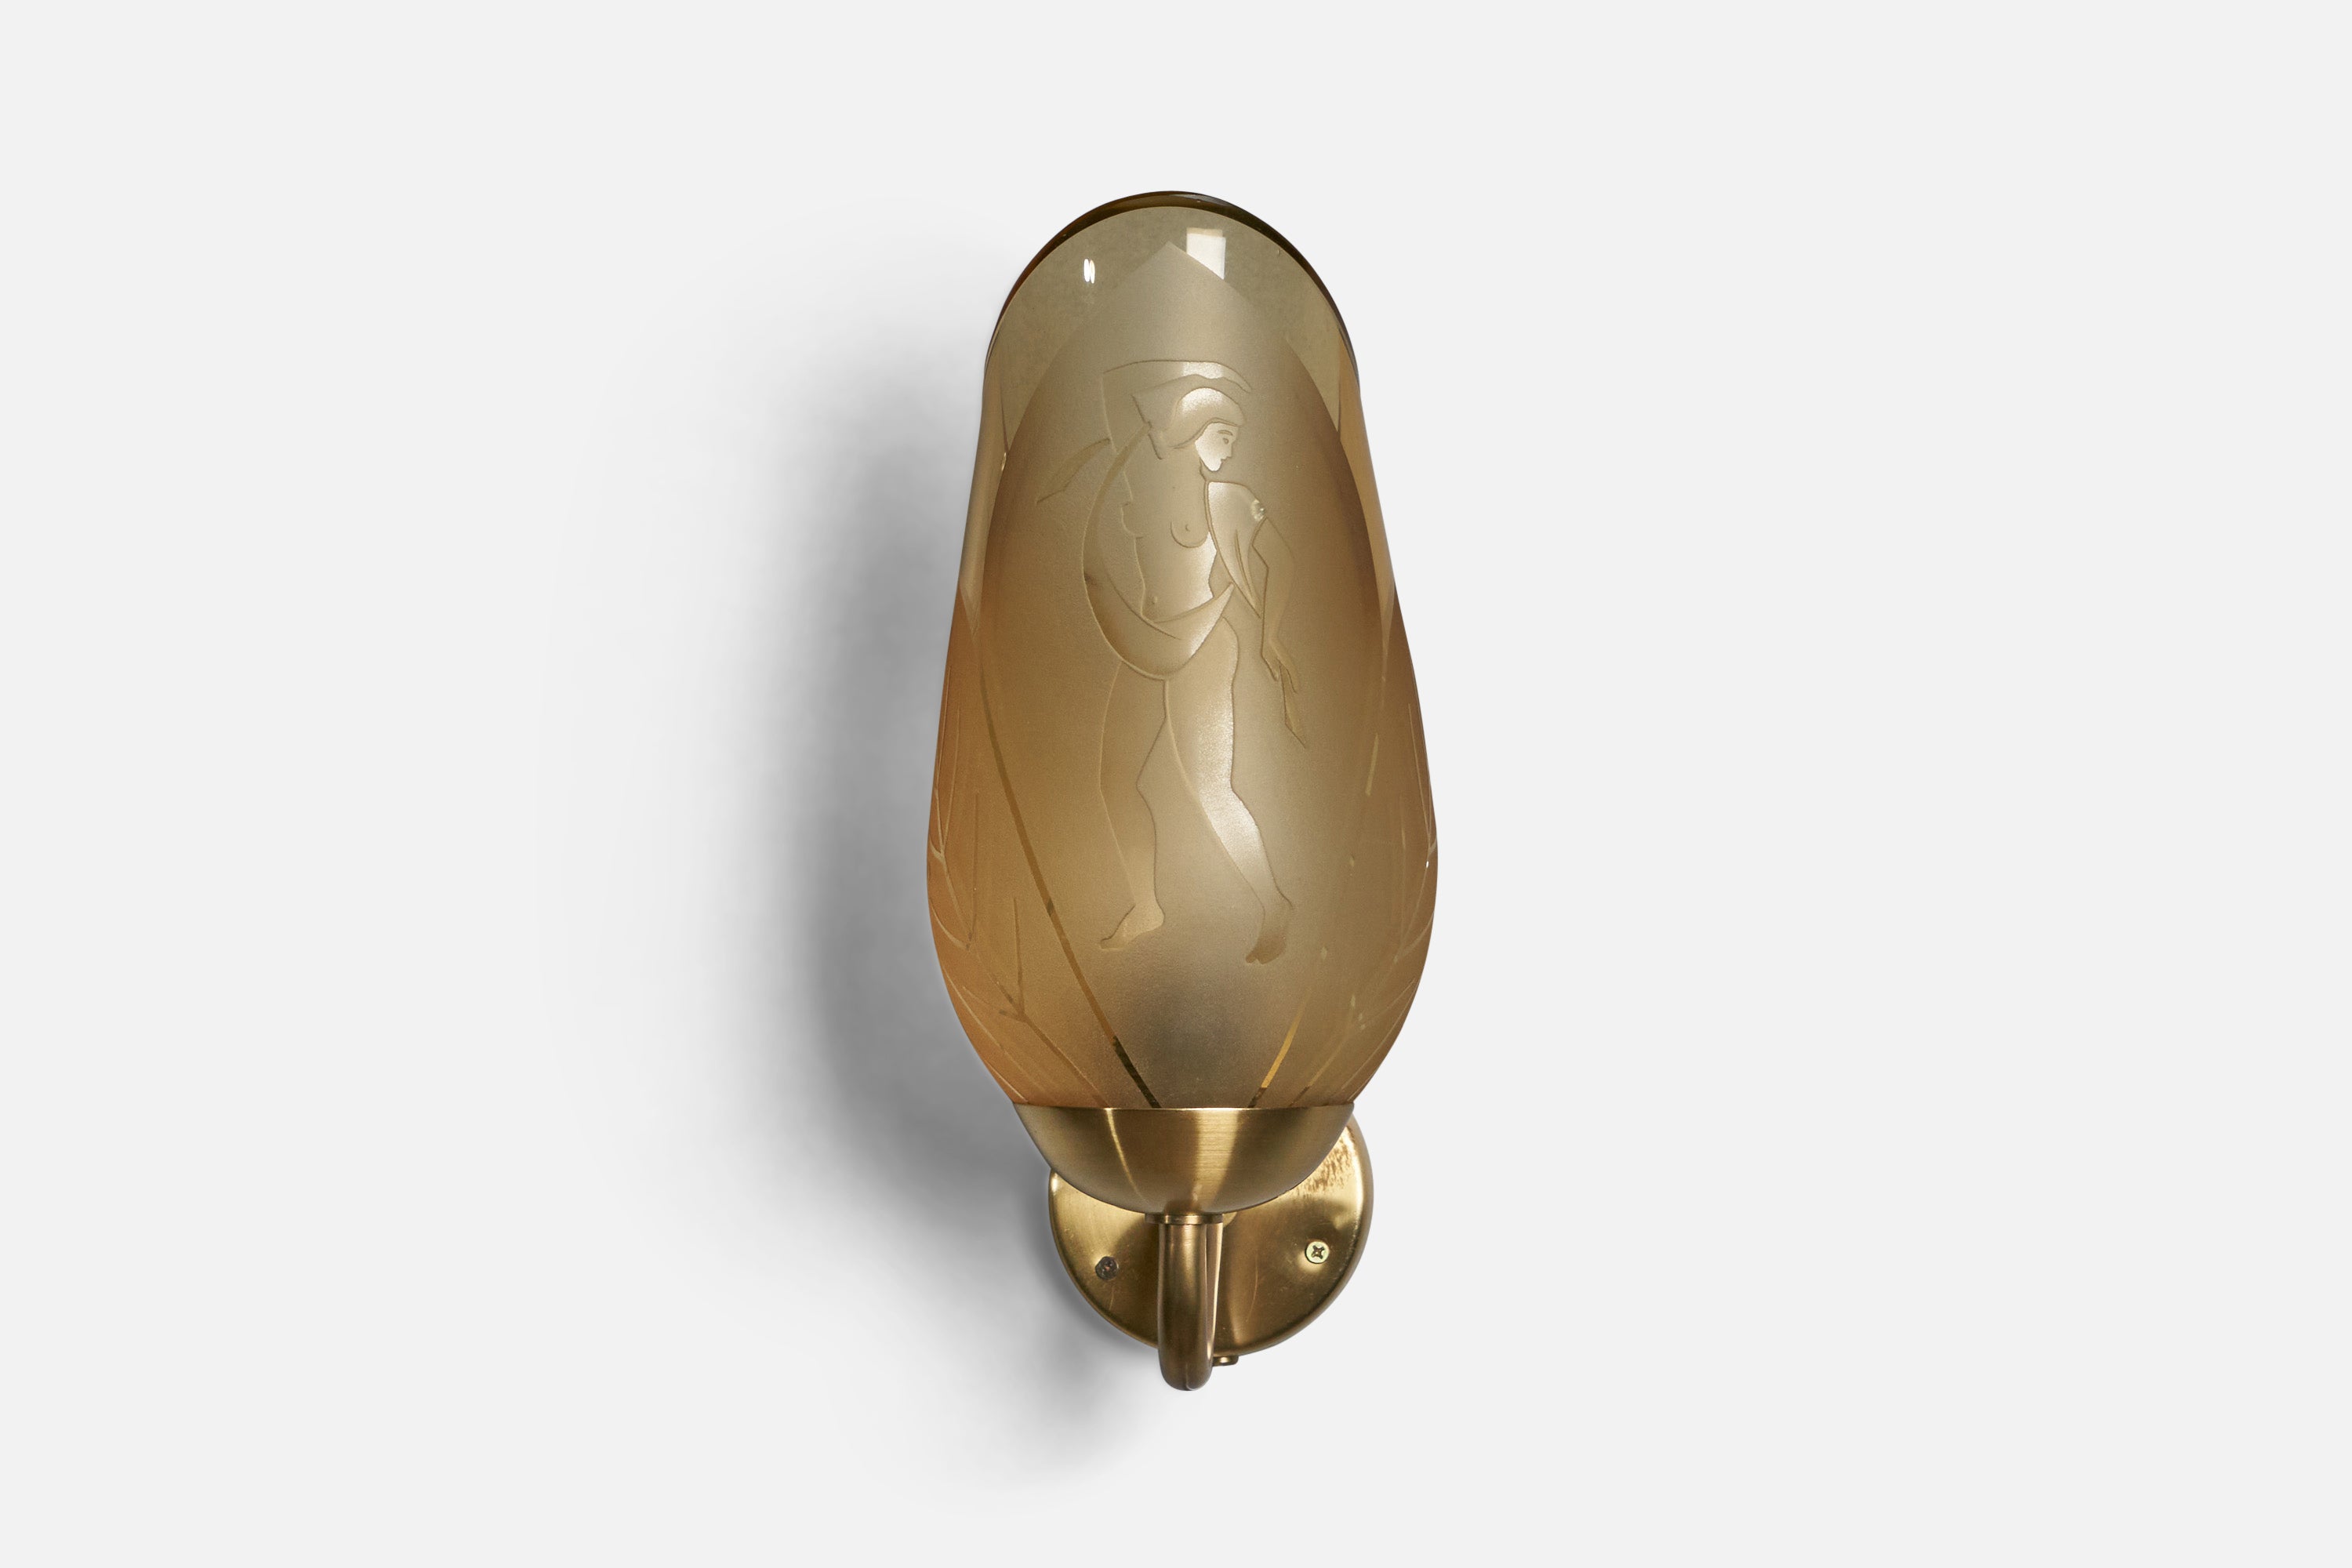 A brass and etched glass wall light, designed by Bo Notini and produced by Glössner, Sweden, 1940s.

Overall Dimensions (inches): 12